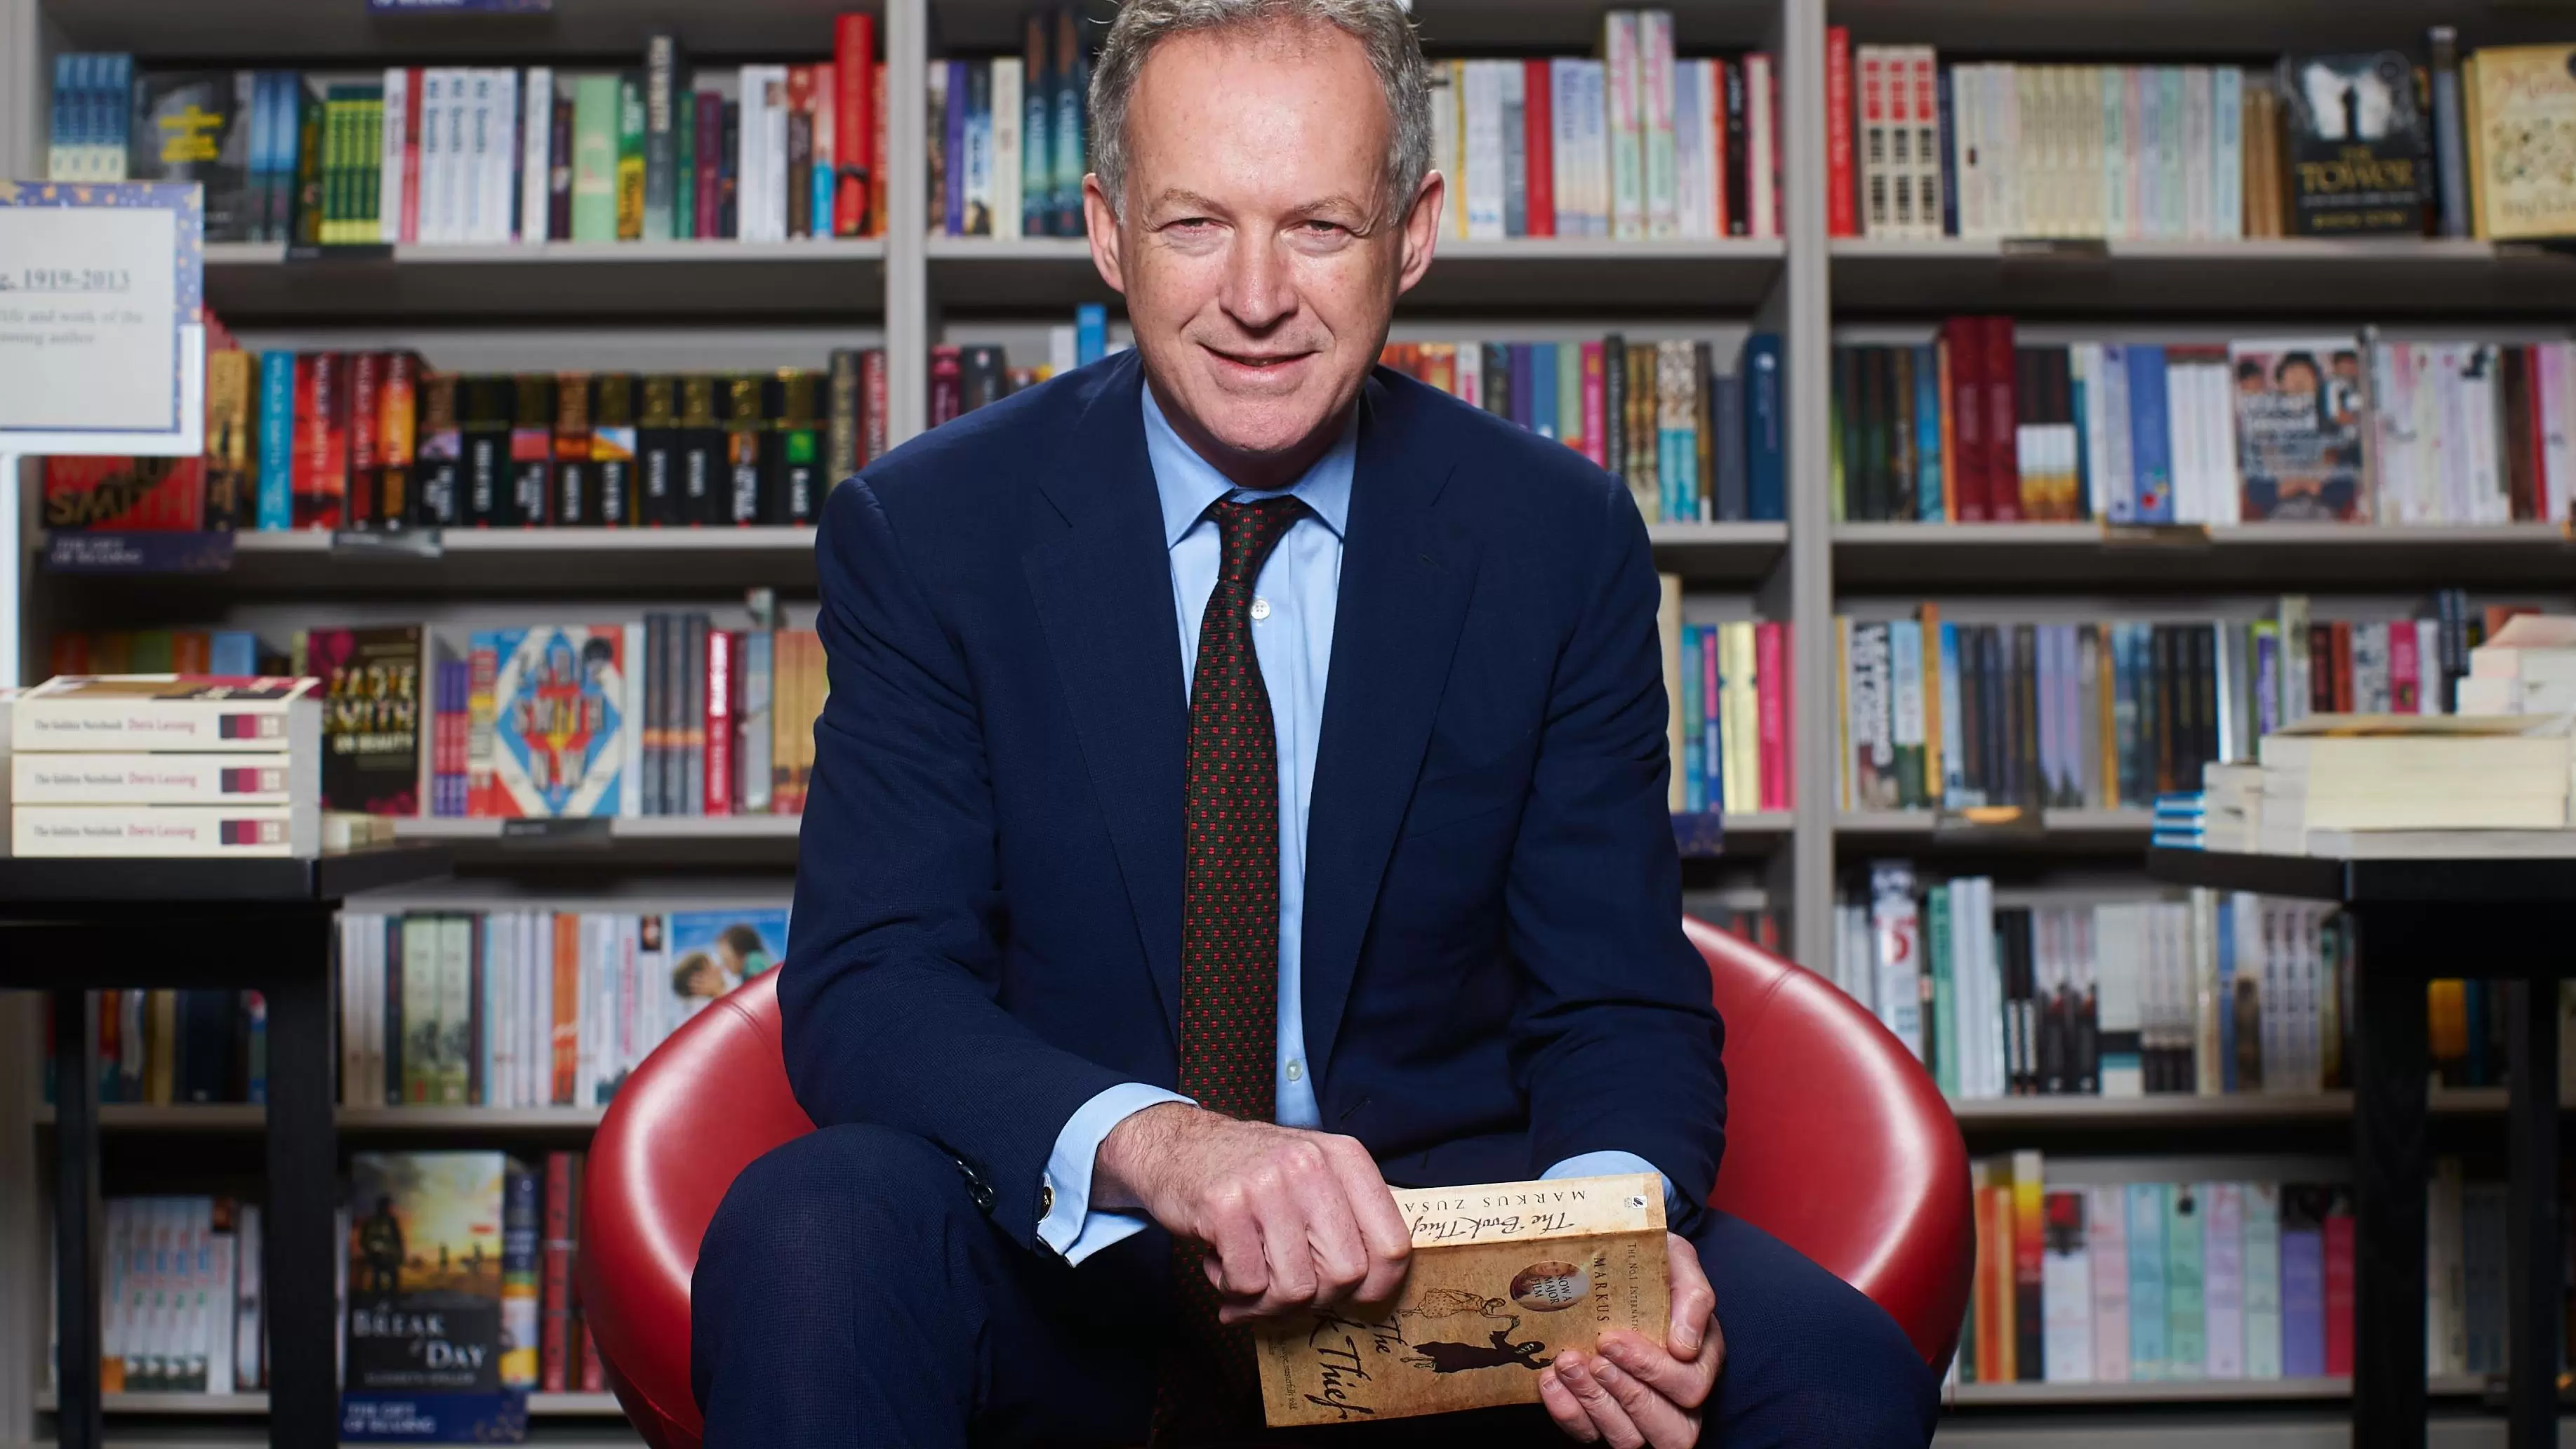 James Daunt, founder of Daunt Books, smiling at the camera holding a book, sat infront of a large bookshelf.